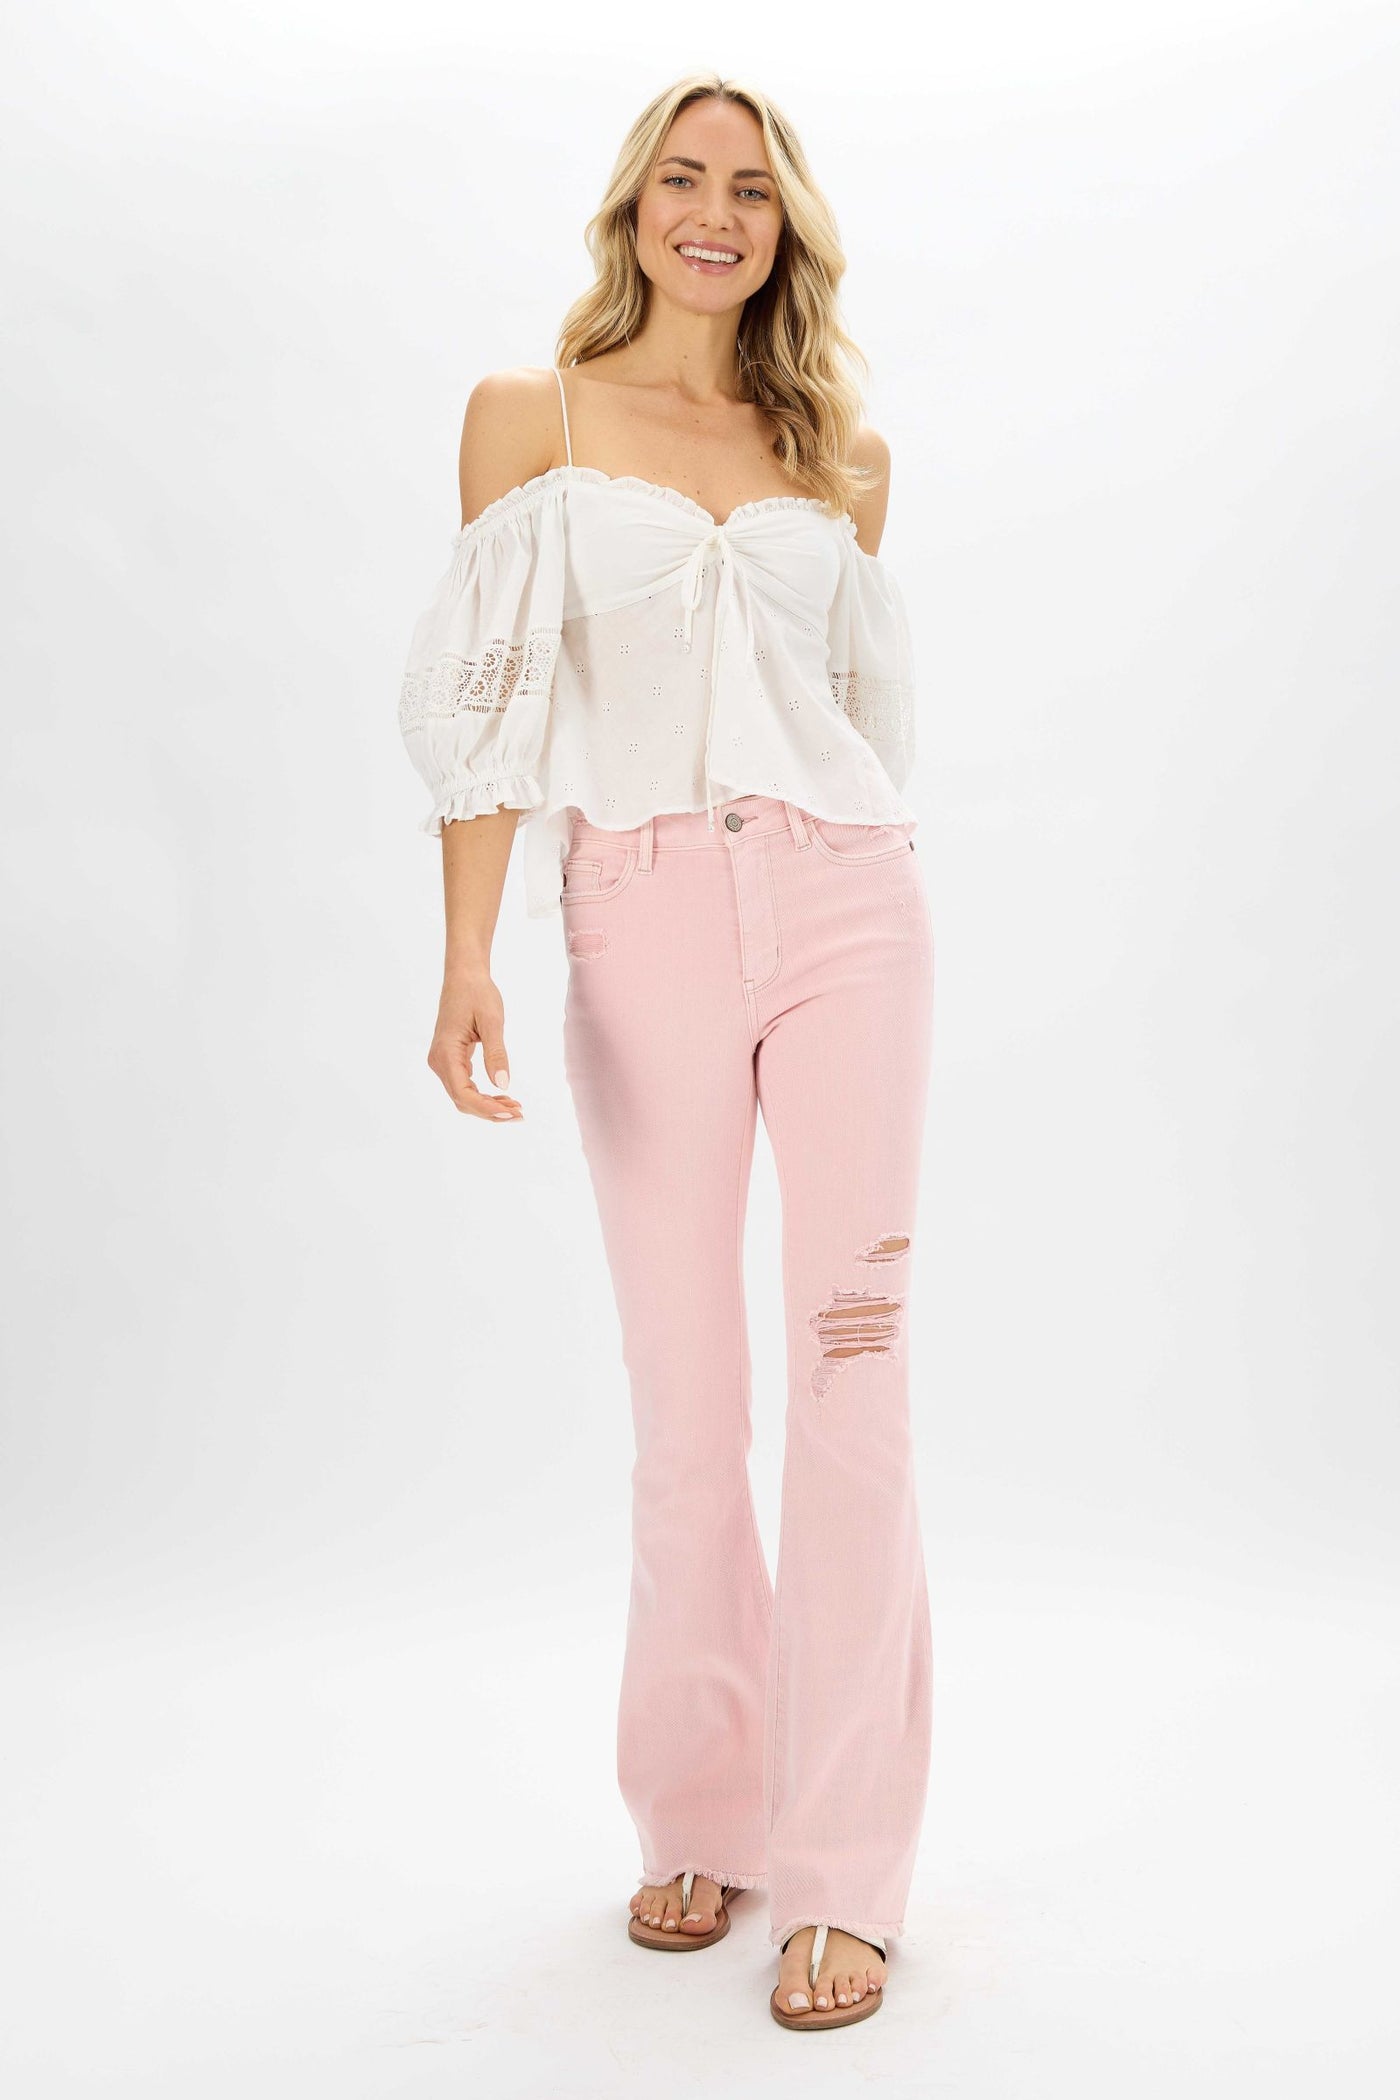 Judy Blue Candy Clouds Pink Distressed Denim Flares